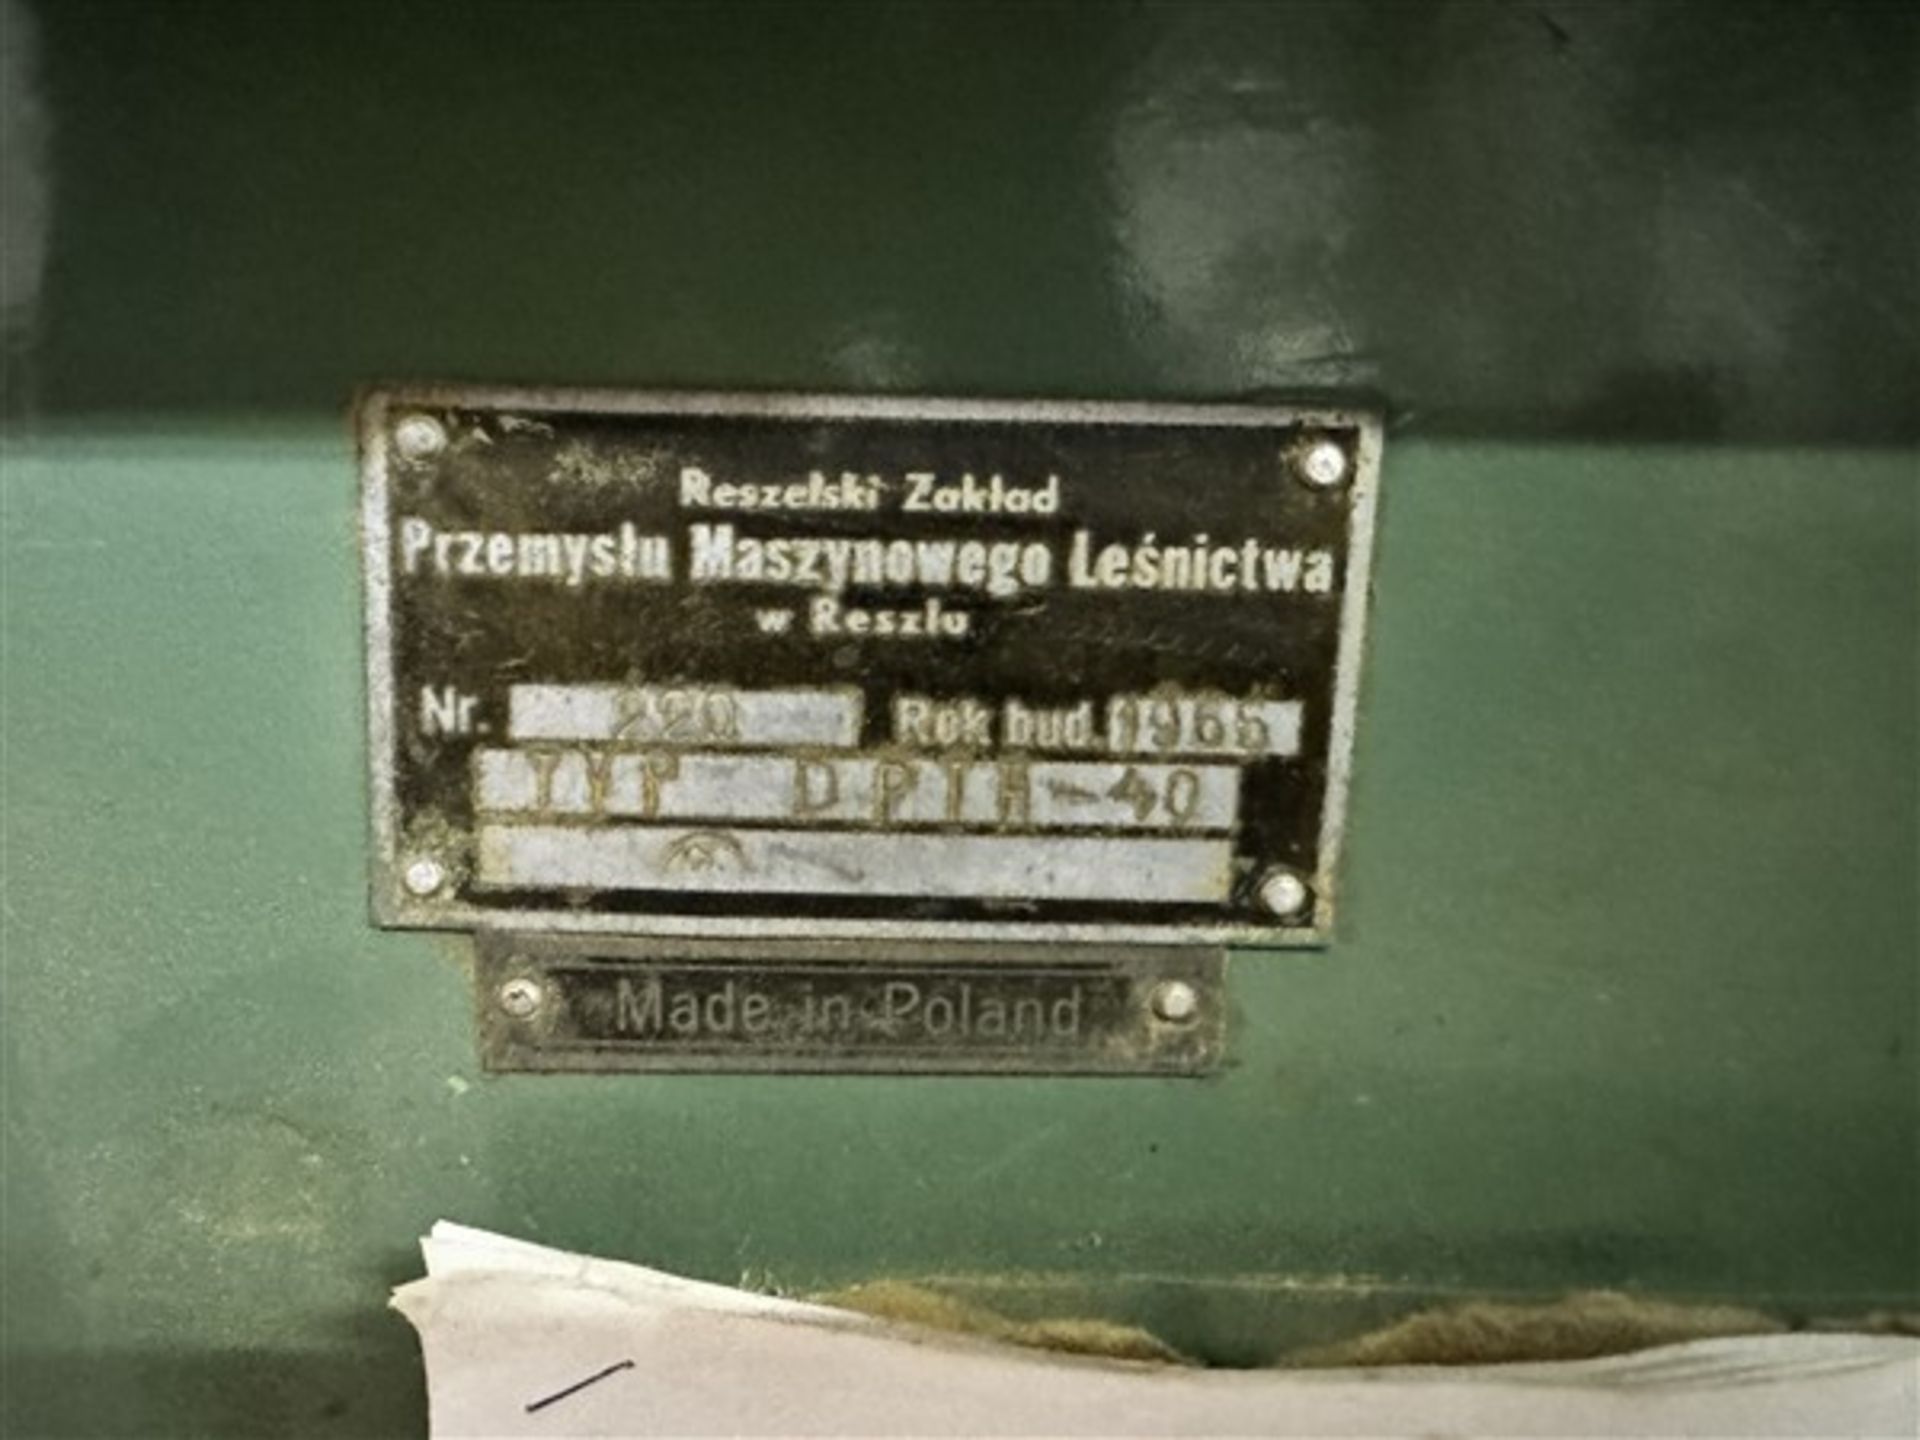 Przemyslu table circular saw bench, type DP1A-40, serial no. 220, year 1965, bed size 1m x 1m - Image 4 of 5